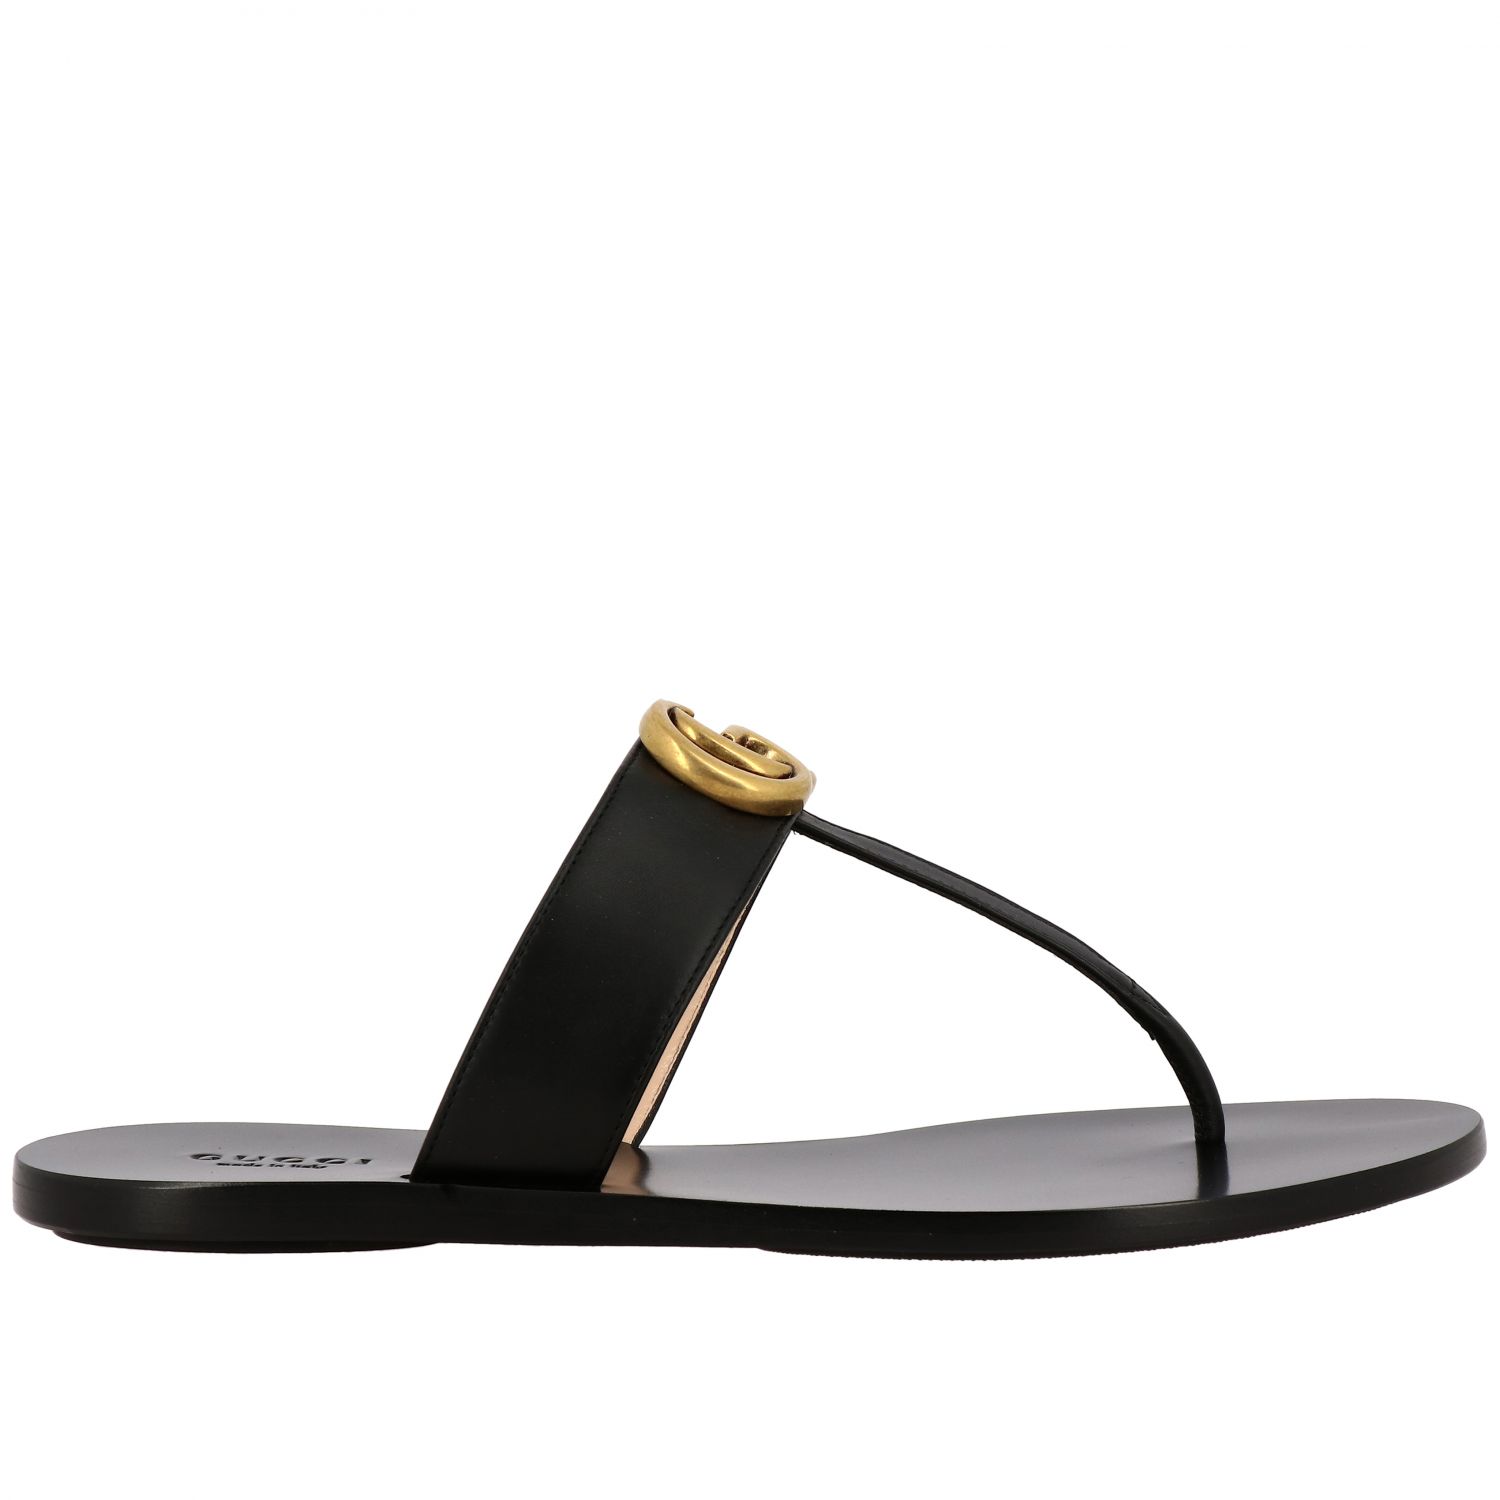 GUCCI: Marmont thong sandal in leather with GG monogram - Black | Gucci ...